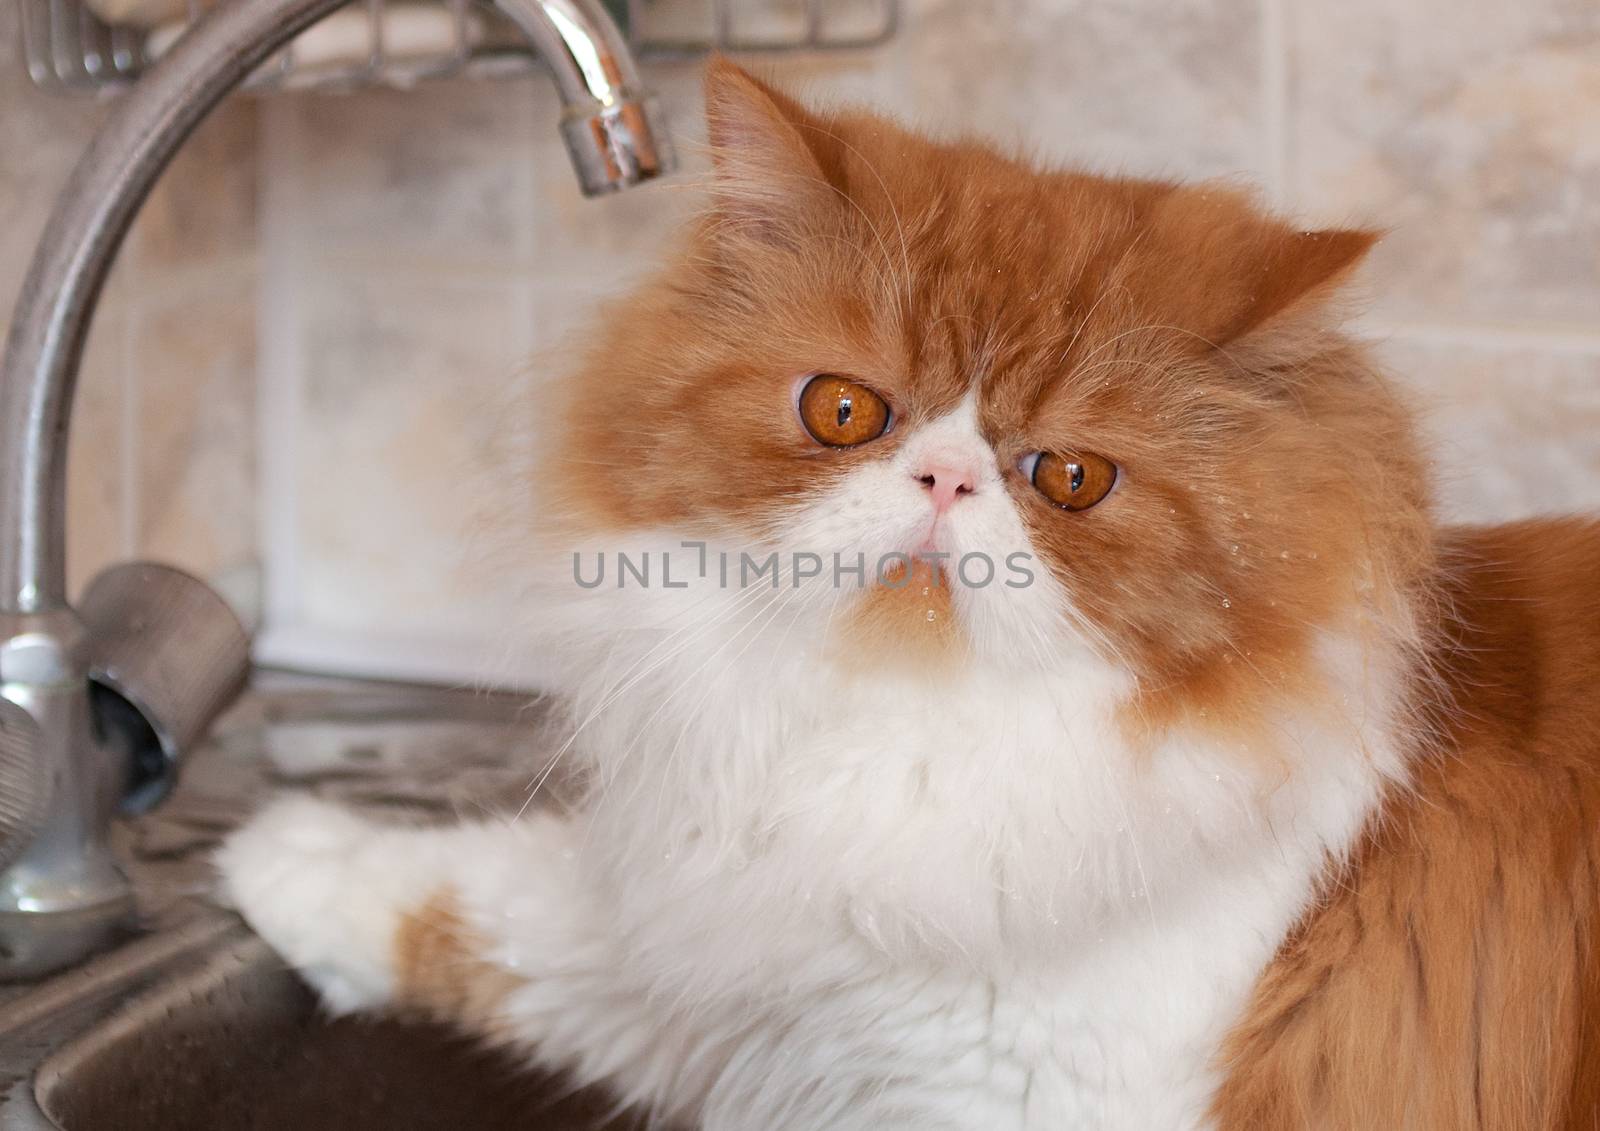 Red cat with water droplets on a muzzle sits in kitchen sink